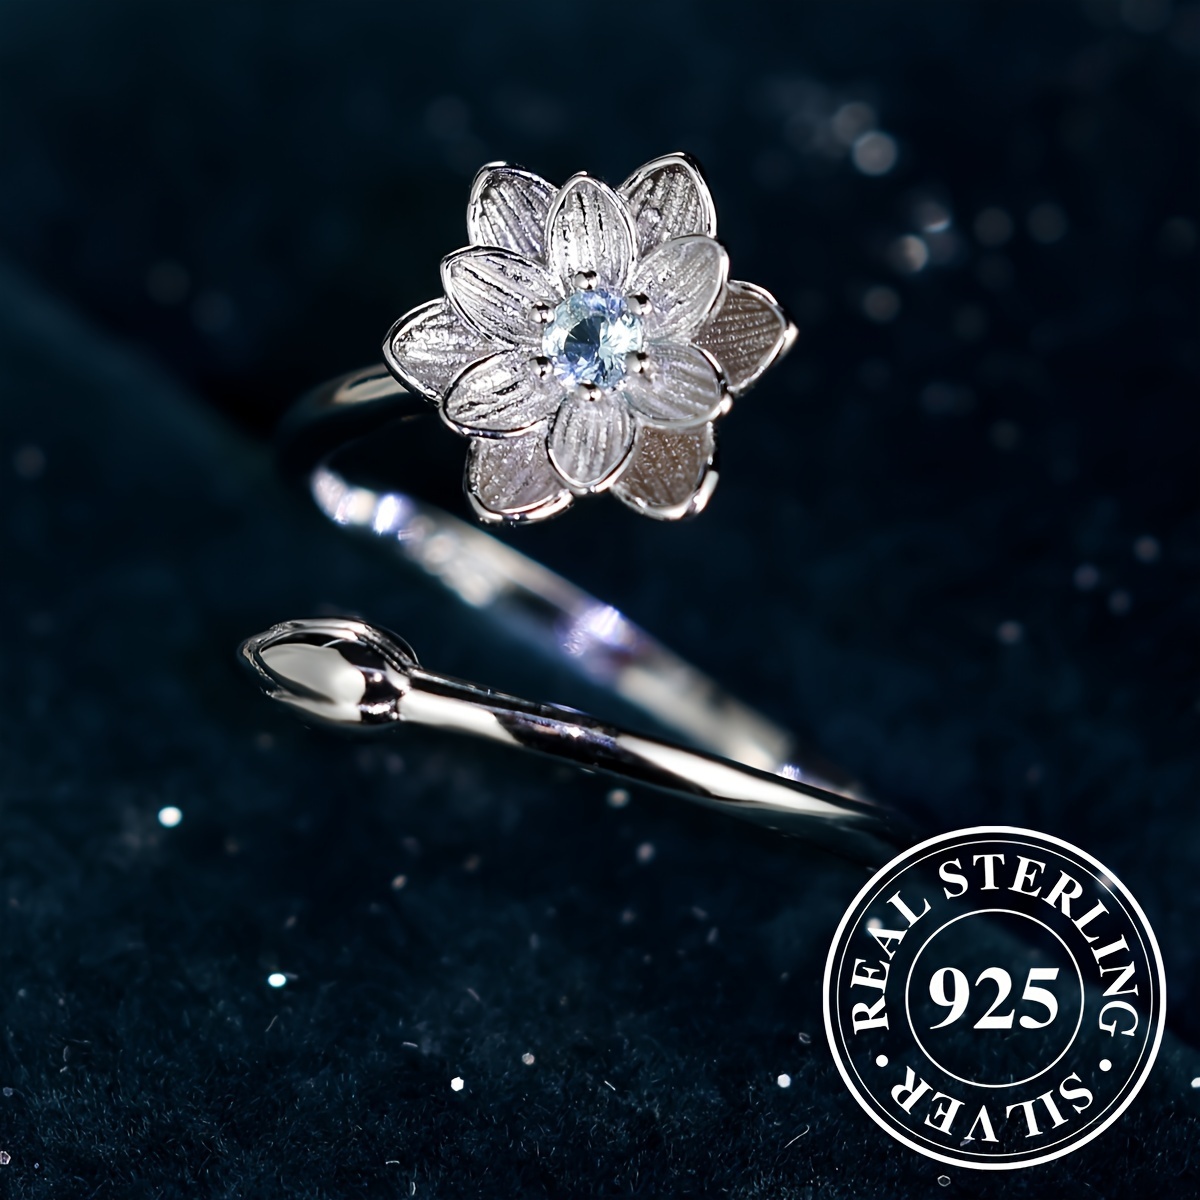 Women's ring, zircon sparkling diamond ring with beautiful romantic jewelry  gift,Zirconia Decorative Flower Ring Sterling Silver